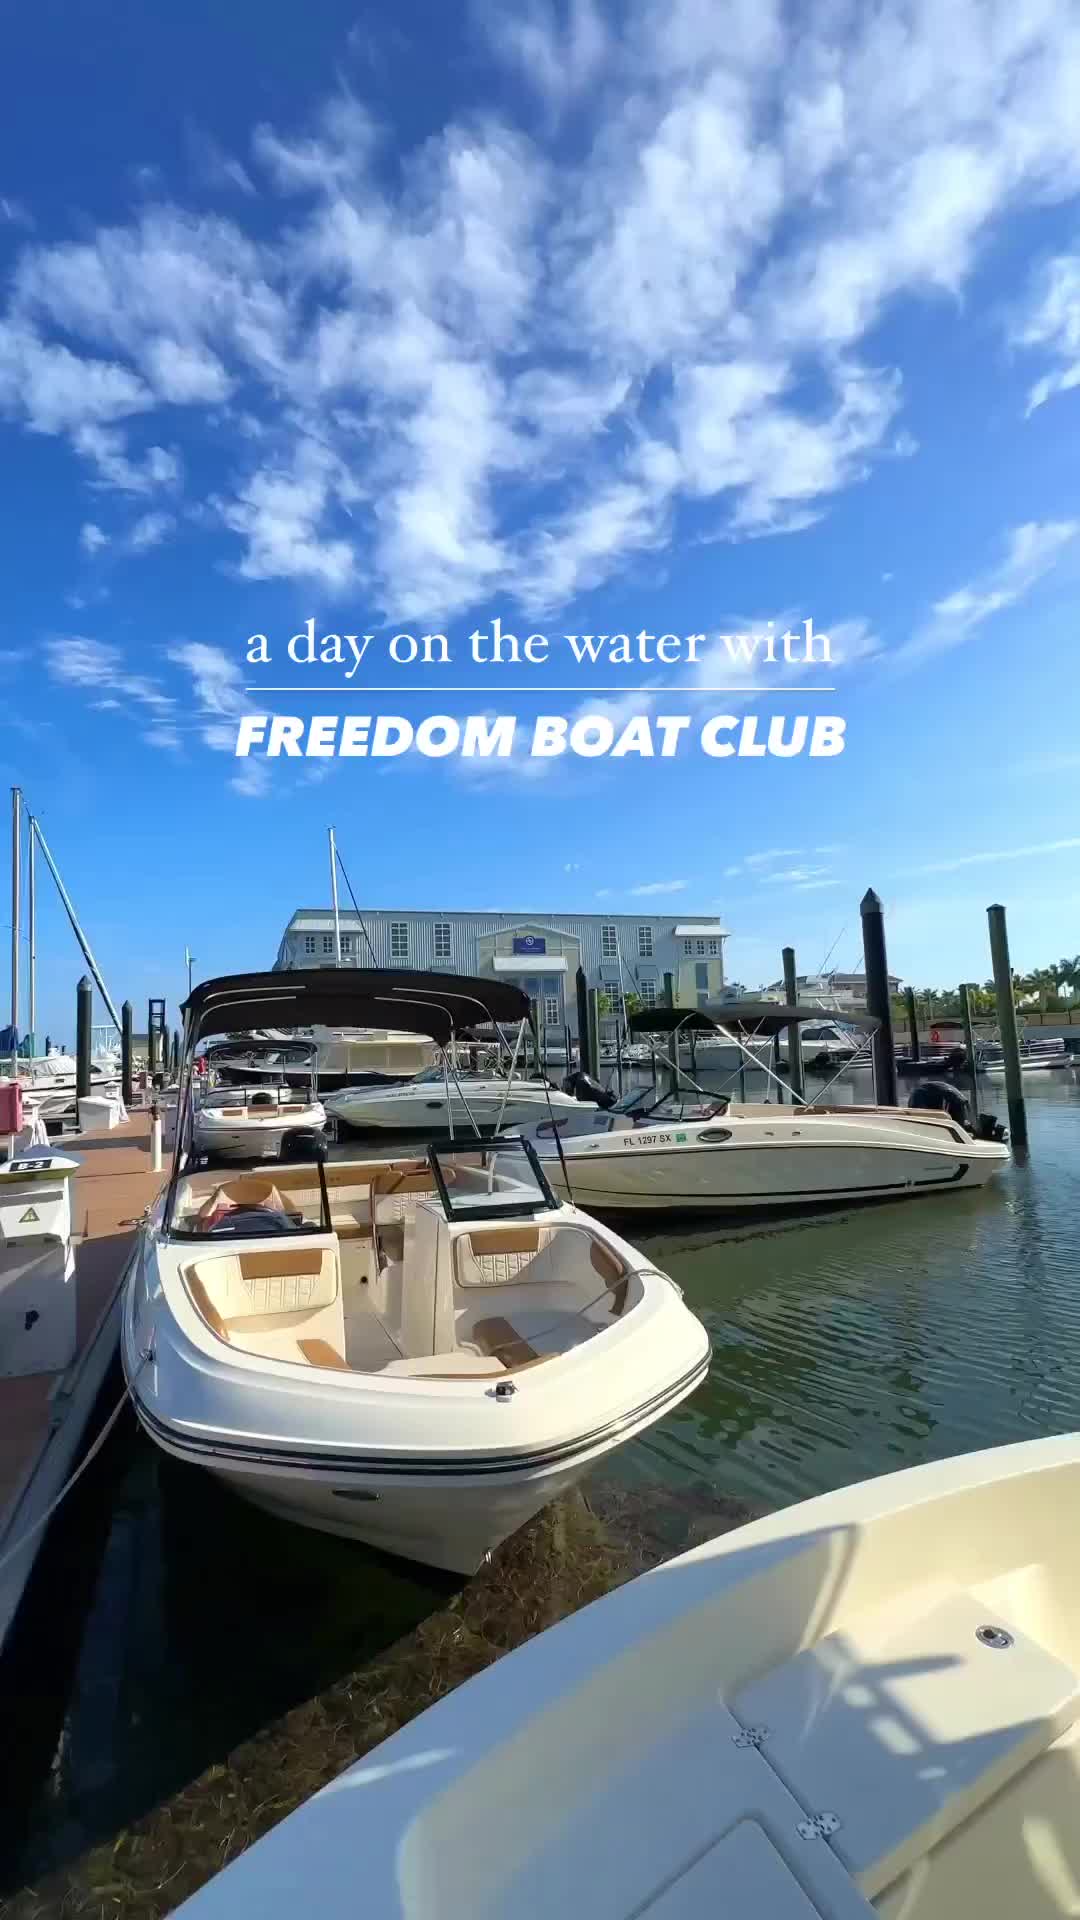 Join the World's Largest Members-Only Boat Club